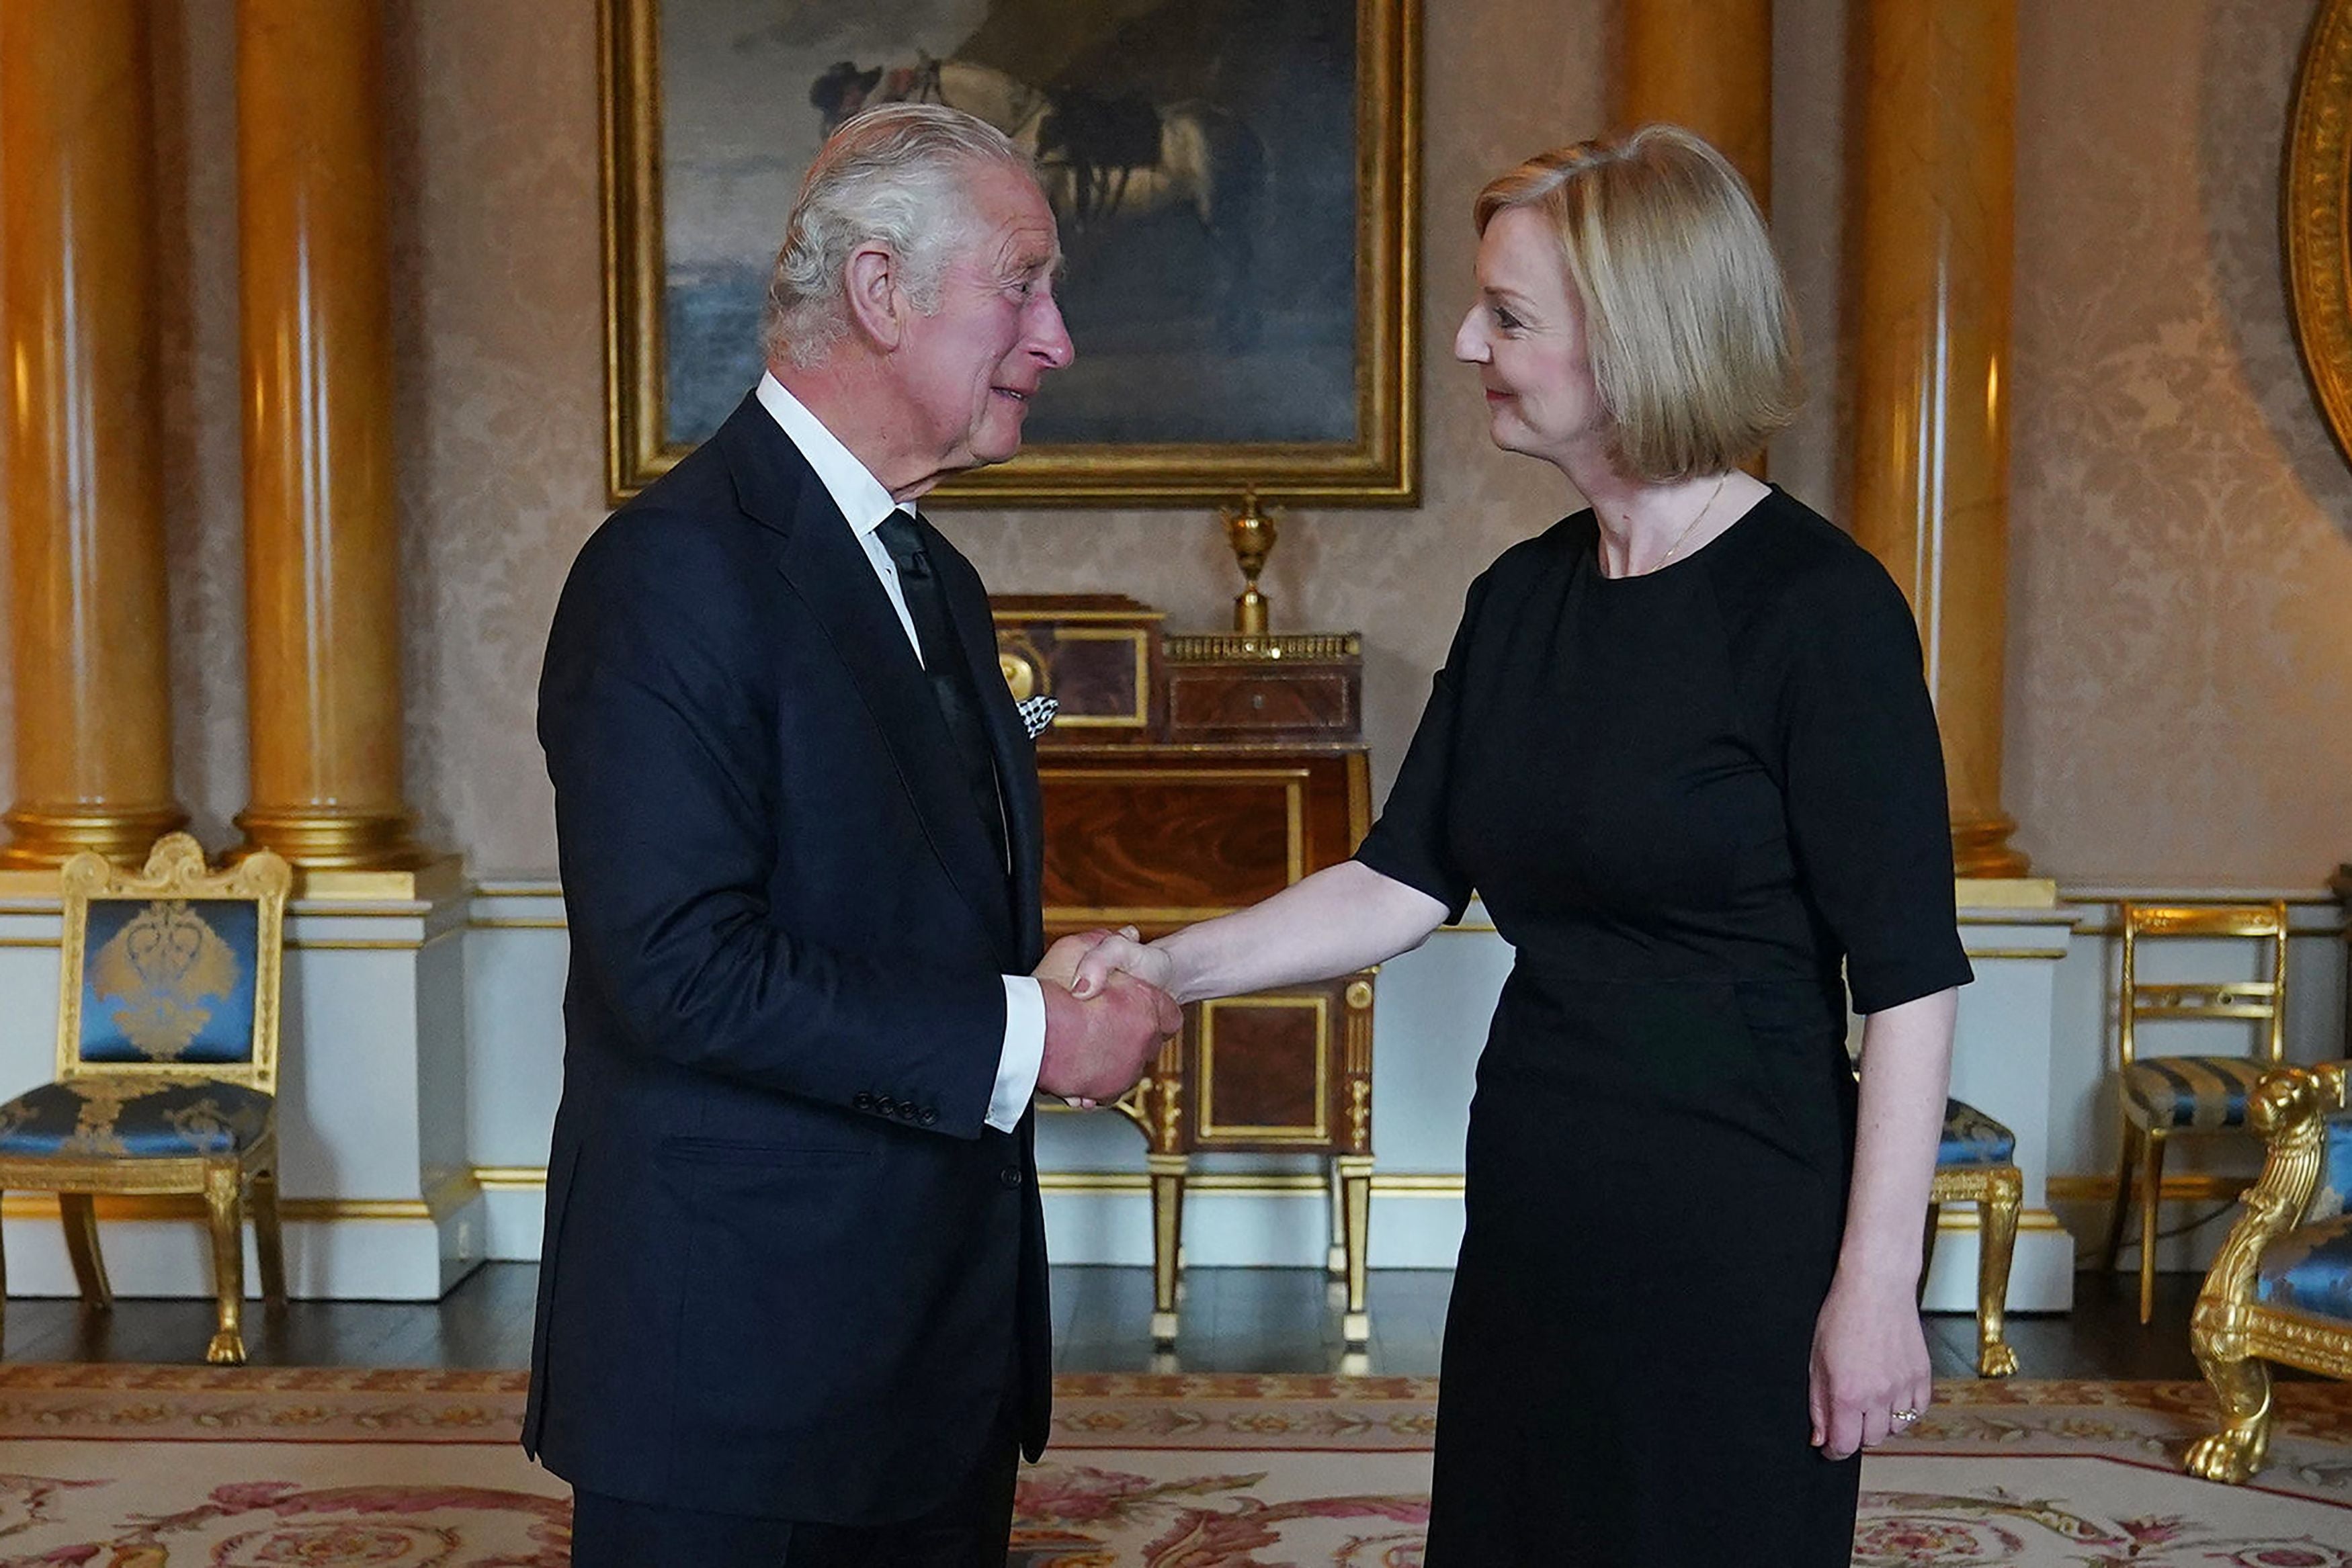 King Charles III greets the new prime minister Liz Truss at Buckingham Palace on Friday